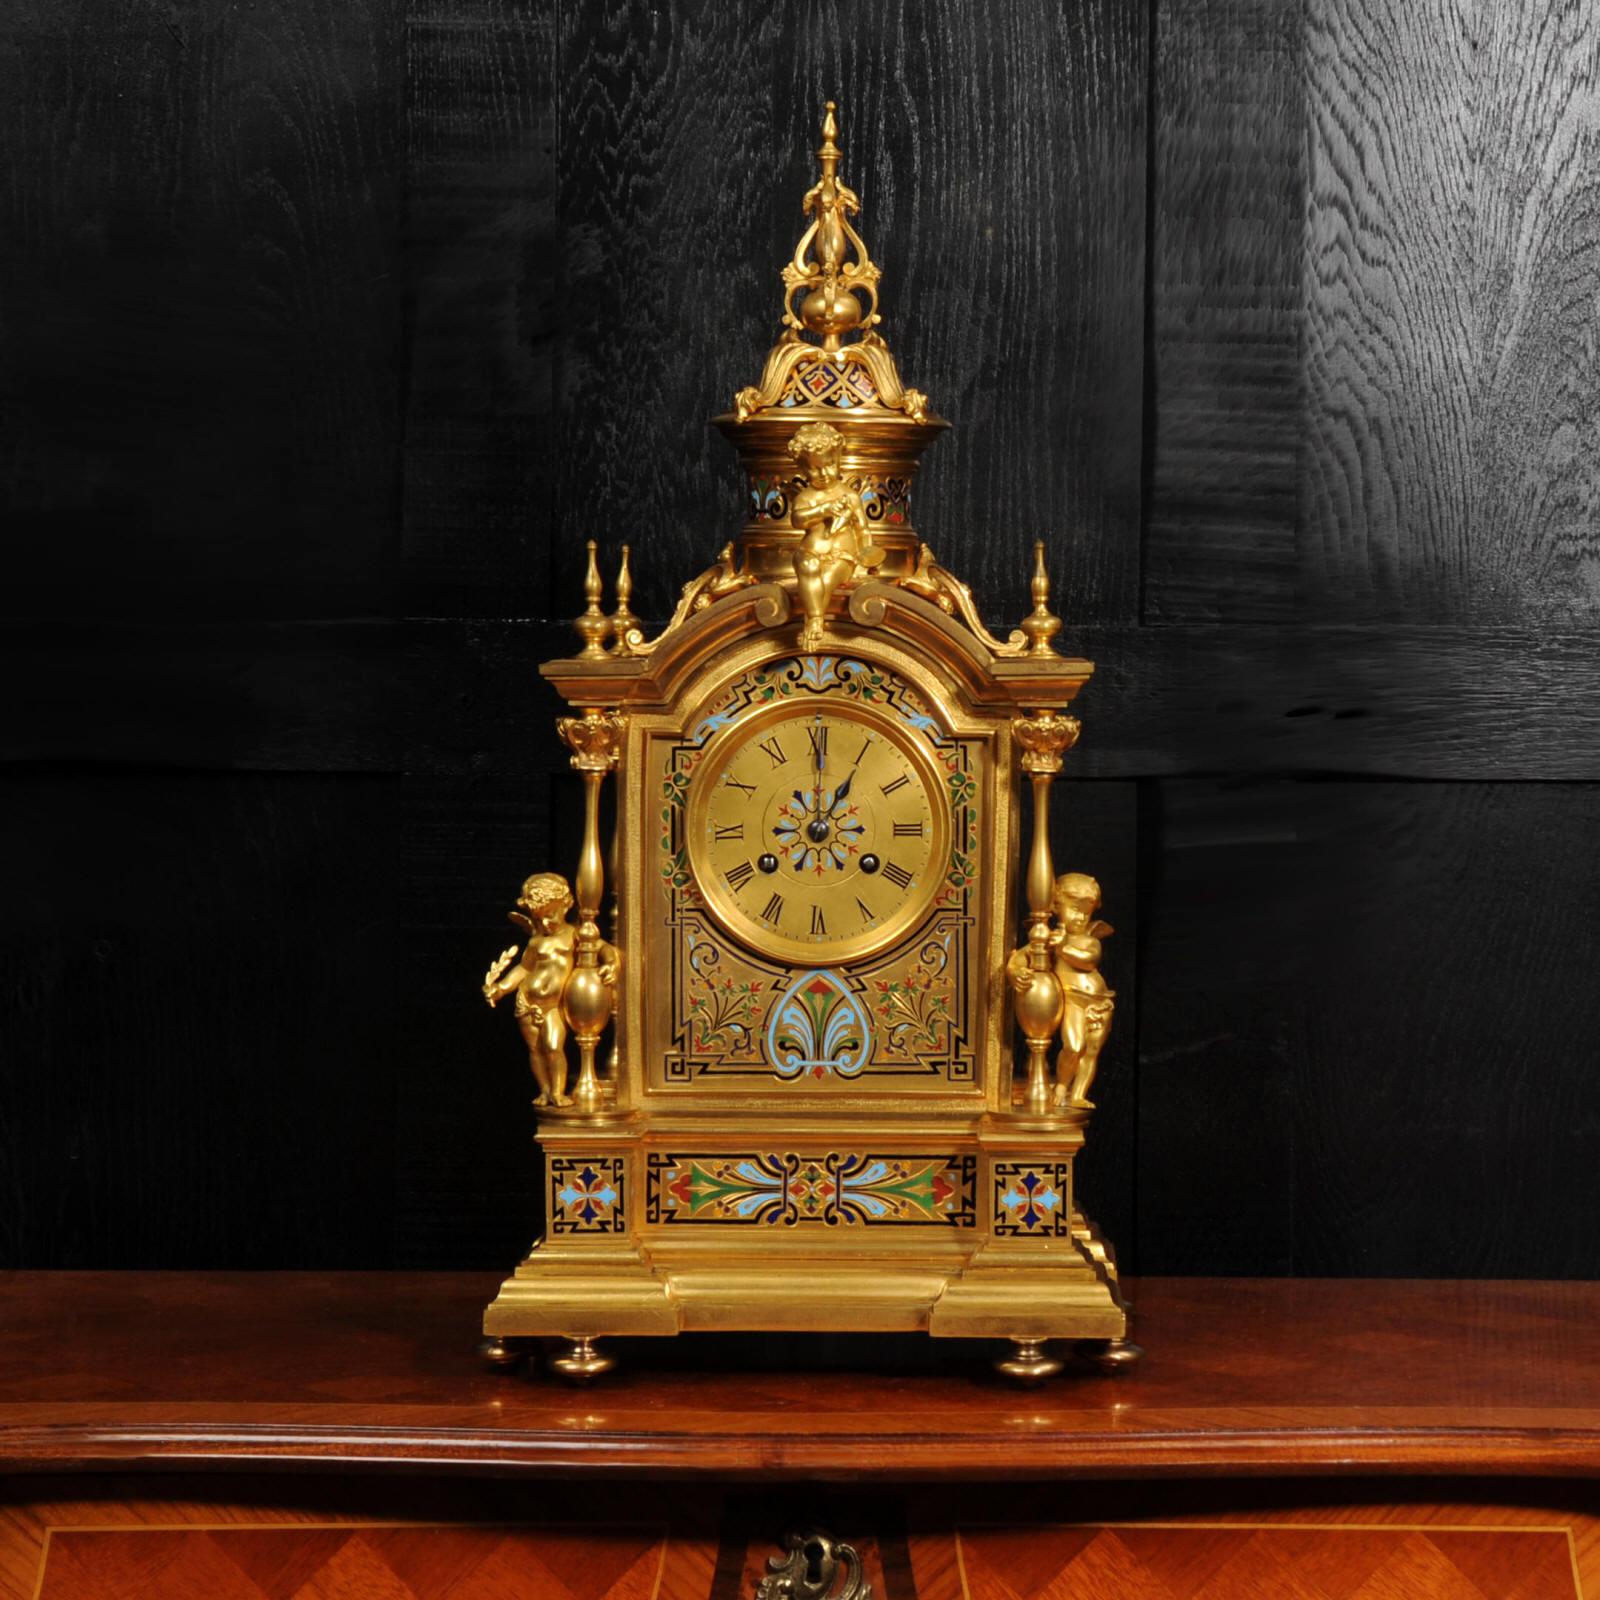 A magnificent Renaissance style clock by the renown Parisian clockmaking firm of Le Roy &Fils. Beautifully modelled in finely gilded bronze and finely decorated with exquisite polychrome champlevé enamel. The case is formed with an arched swan neck